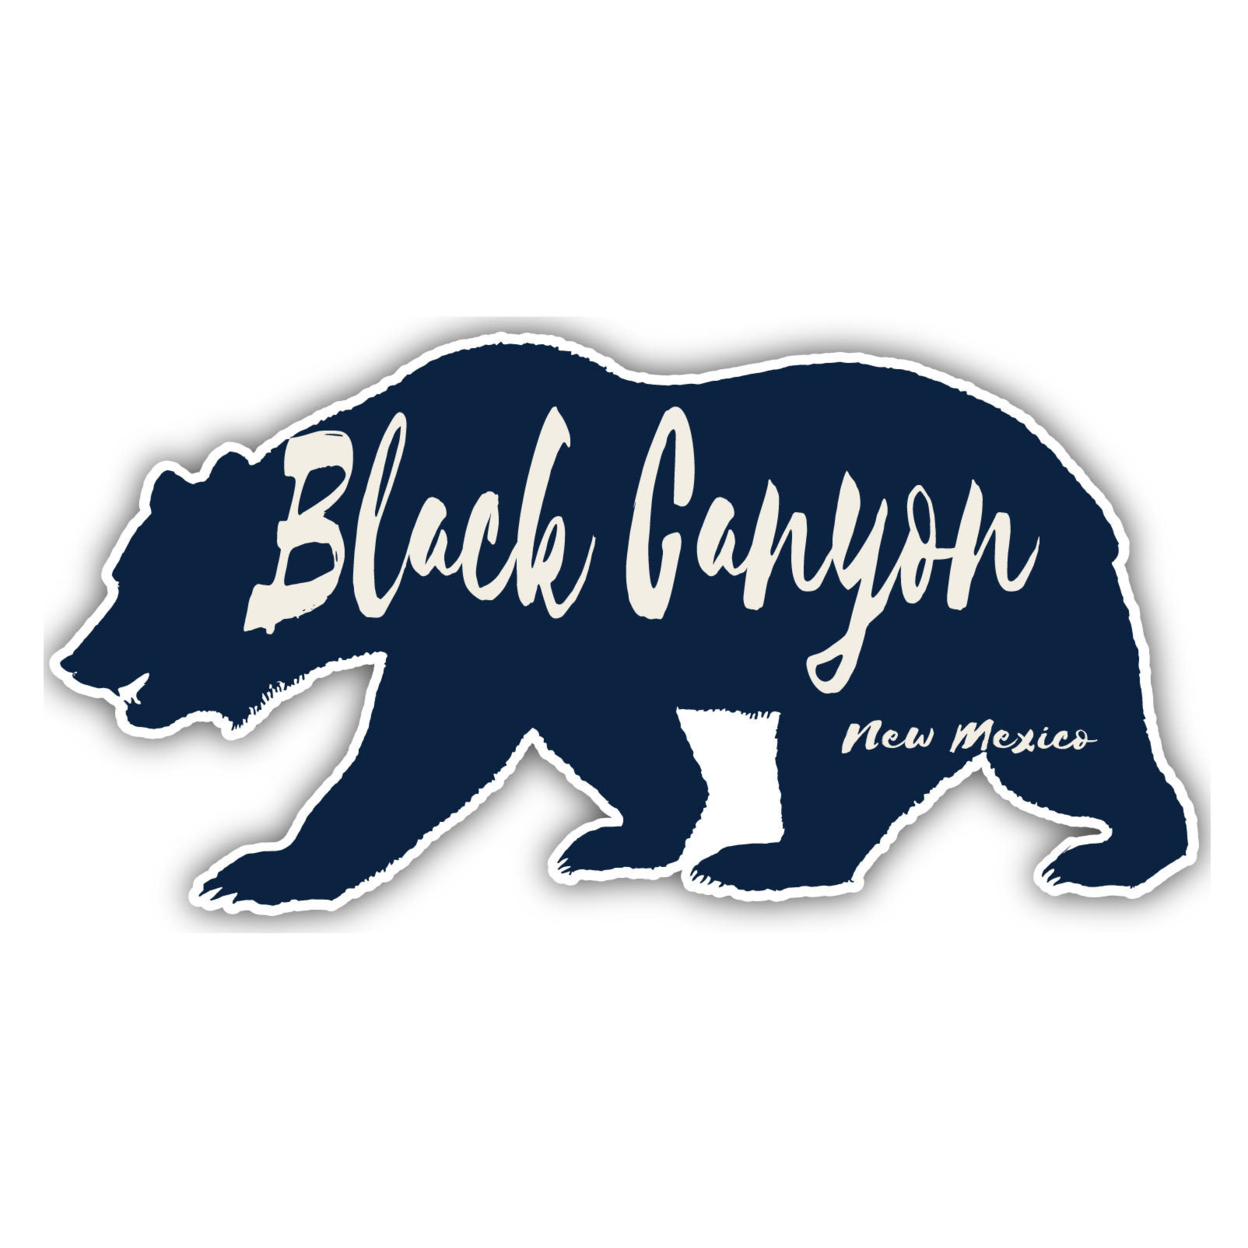 Black Canyon New Mexico Souvenir Decorative Stickers (Choose Theme And Size) - 4-Pack, 8-Inch, Bear